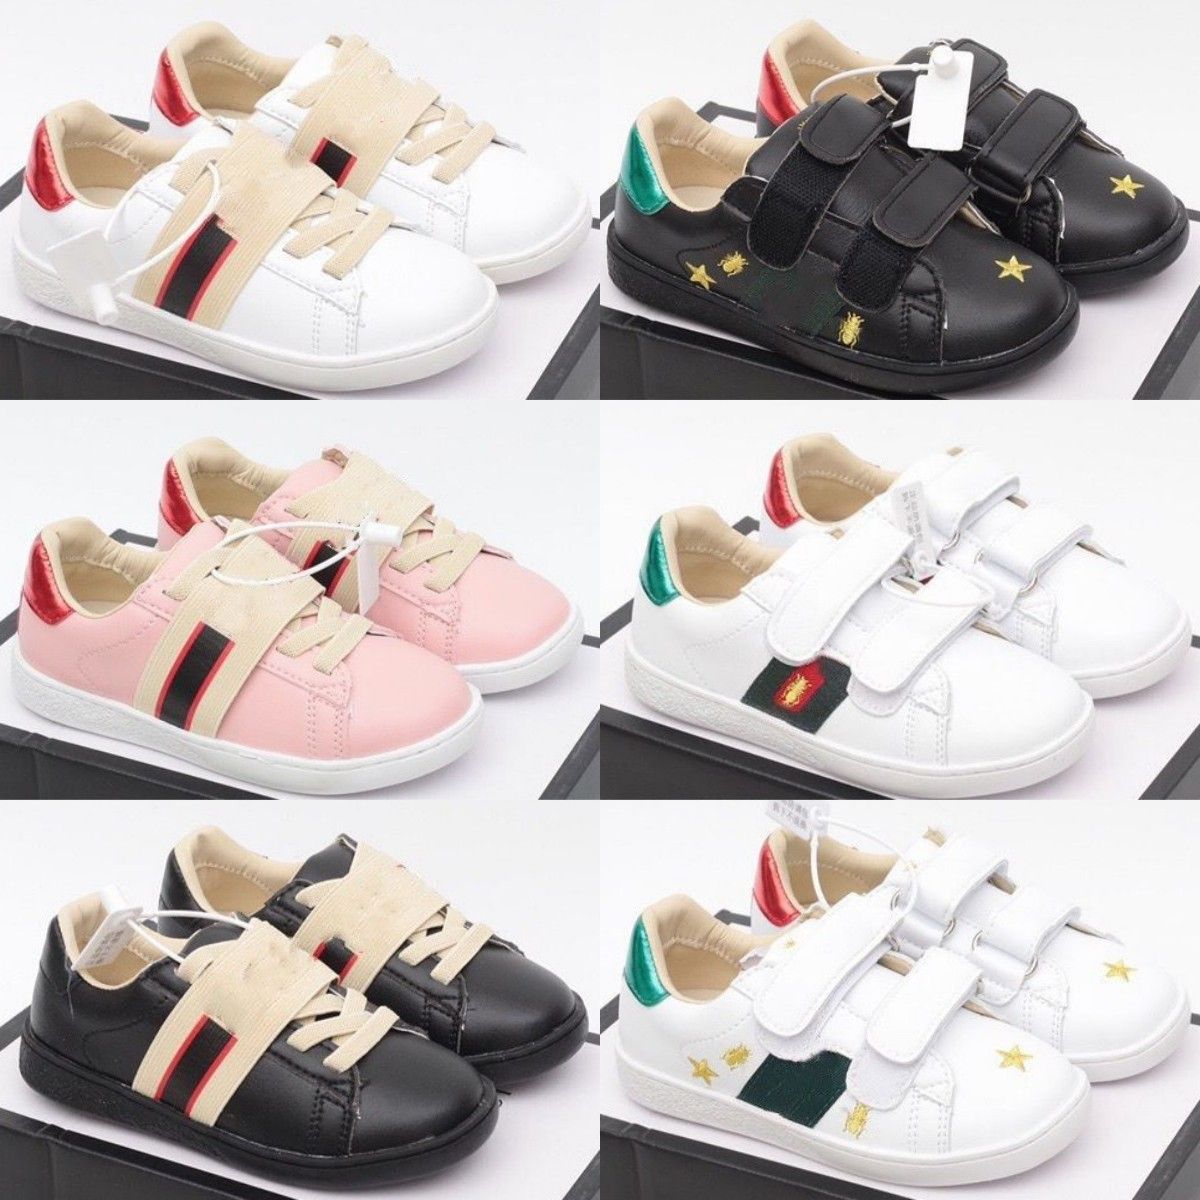 

Kids Shoes Designer Casual Bee Trainers Toddler Baby Shoe Kid Youth Sneaker Infants Boys Girls Children Black White Pink Luxury Brands Sneakers Q0T8#